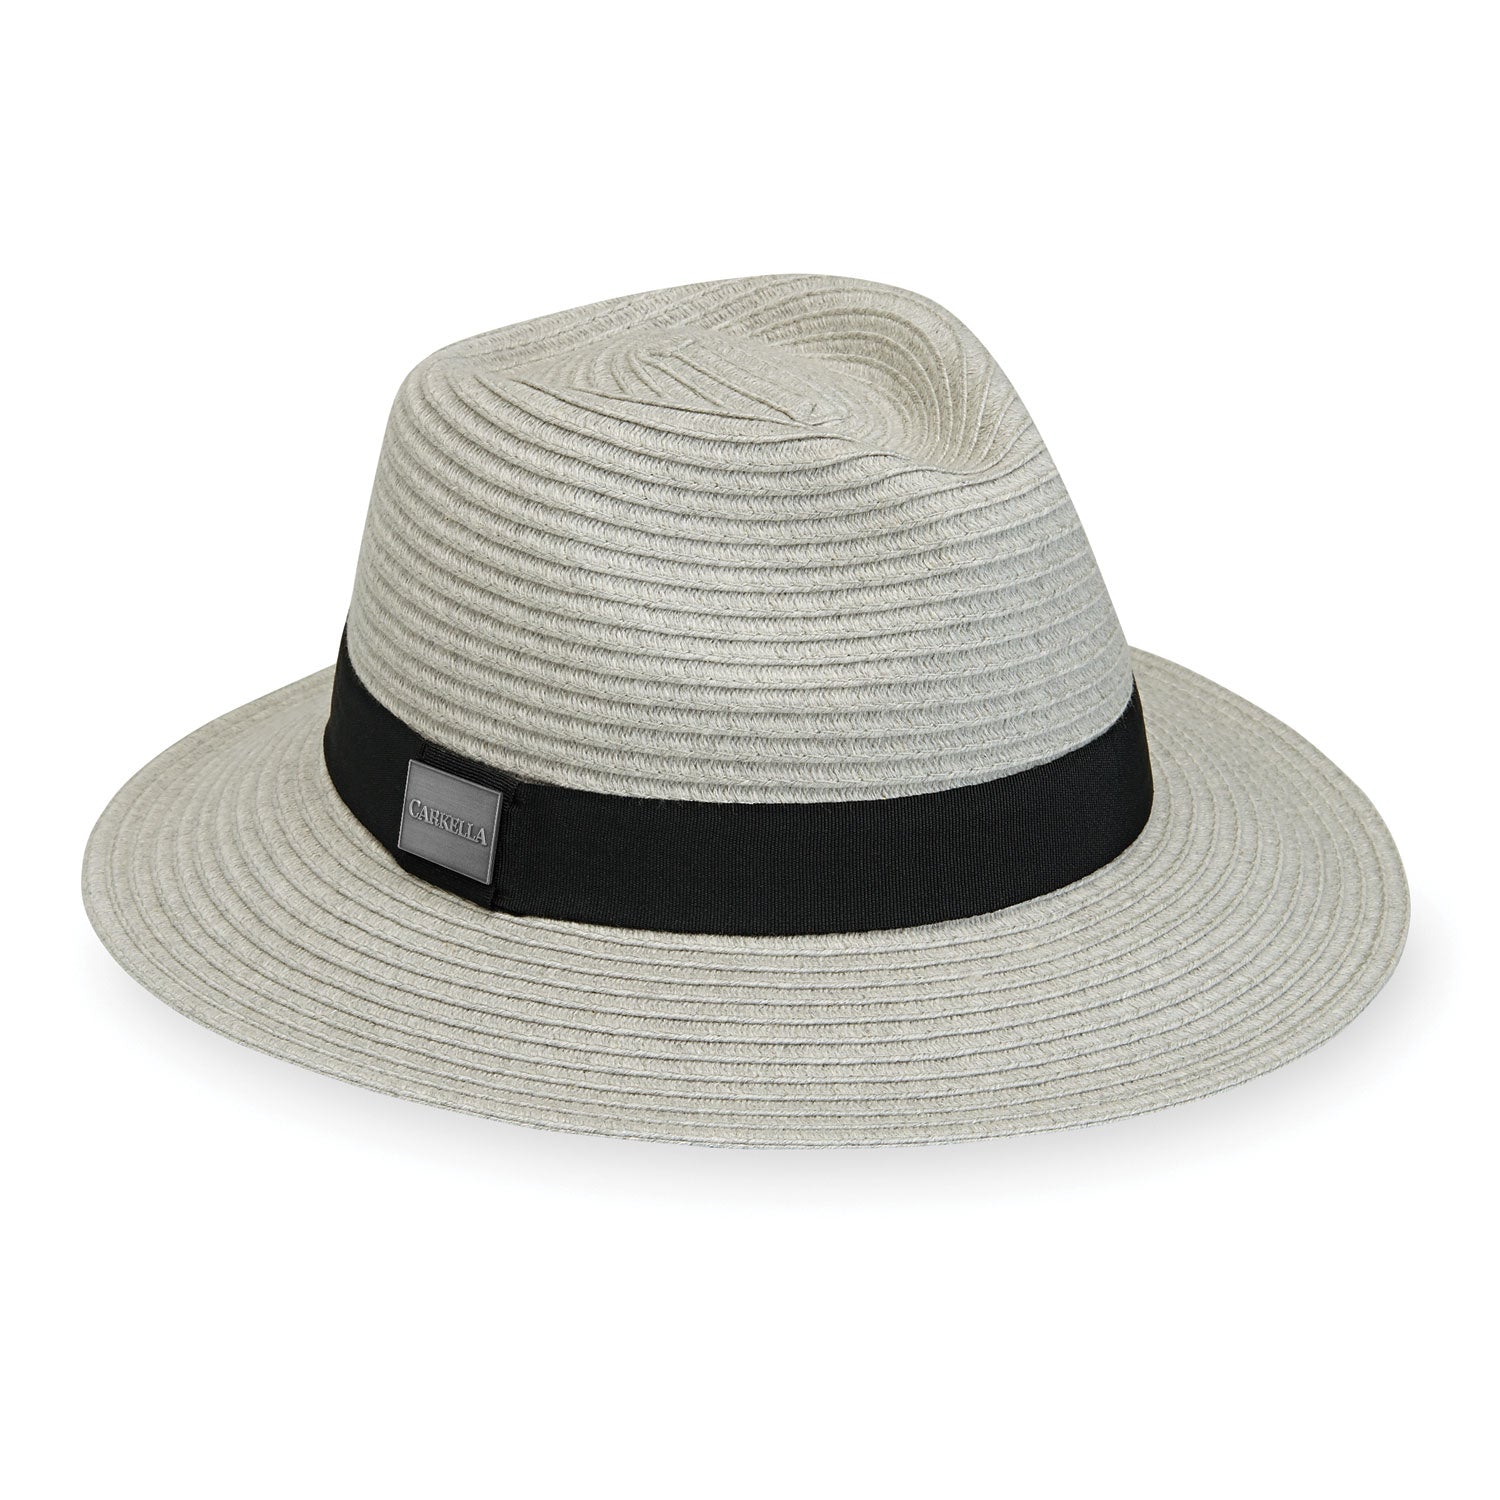 Featuring The Fedora Style Fairway, a sun hat  meant for travel and golf in Light Grey from Carkella